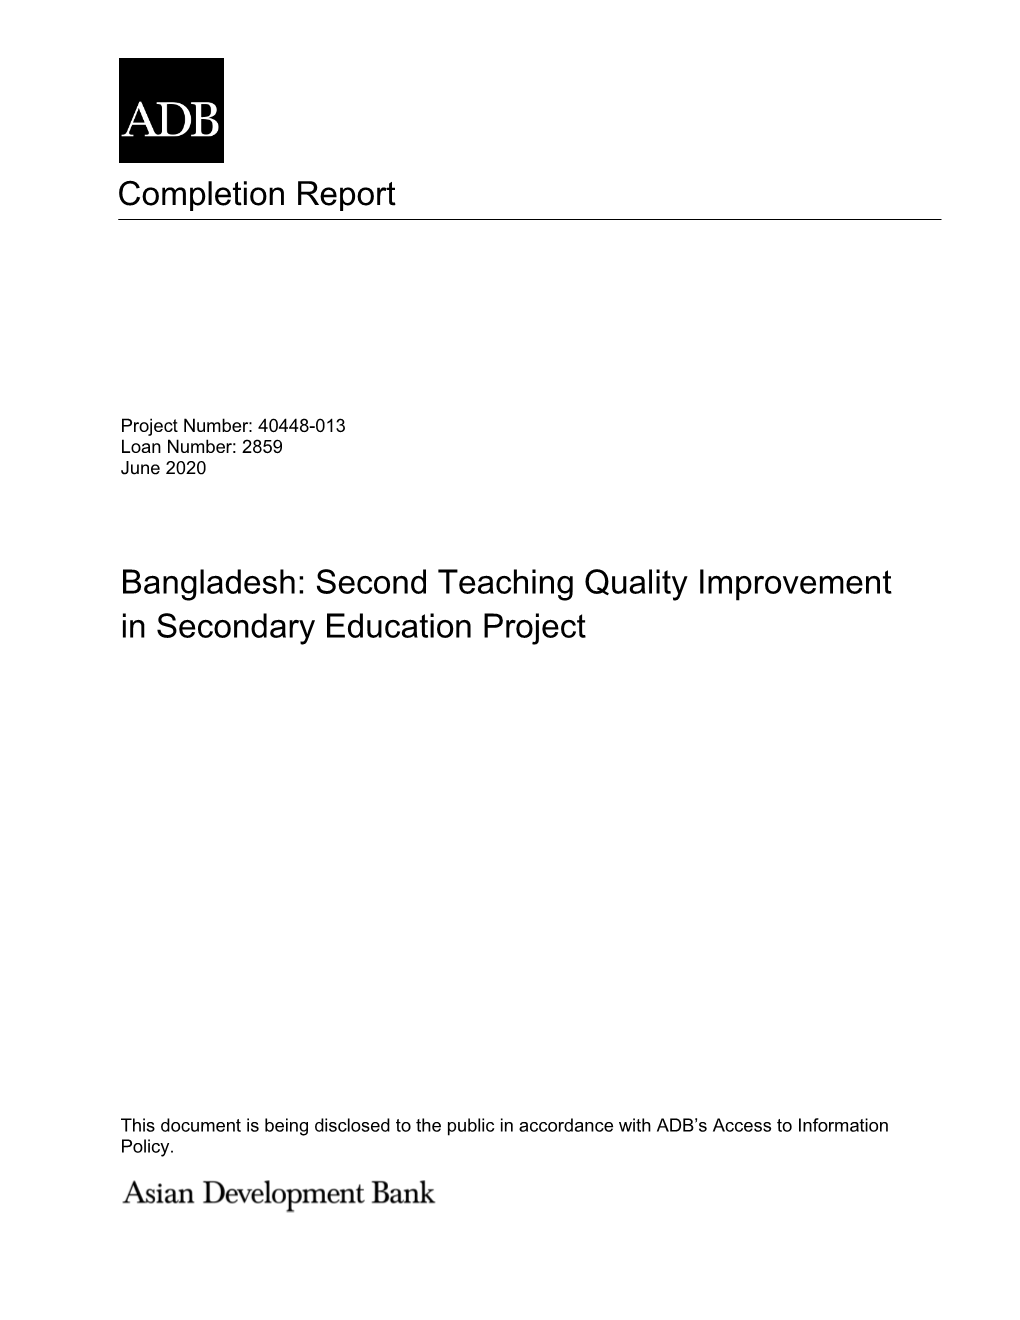 40448-013: Second Teaching Quality Improvement in Secondary